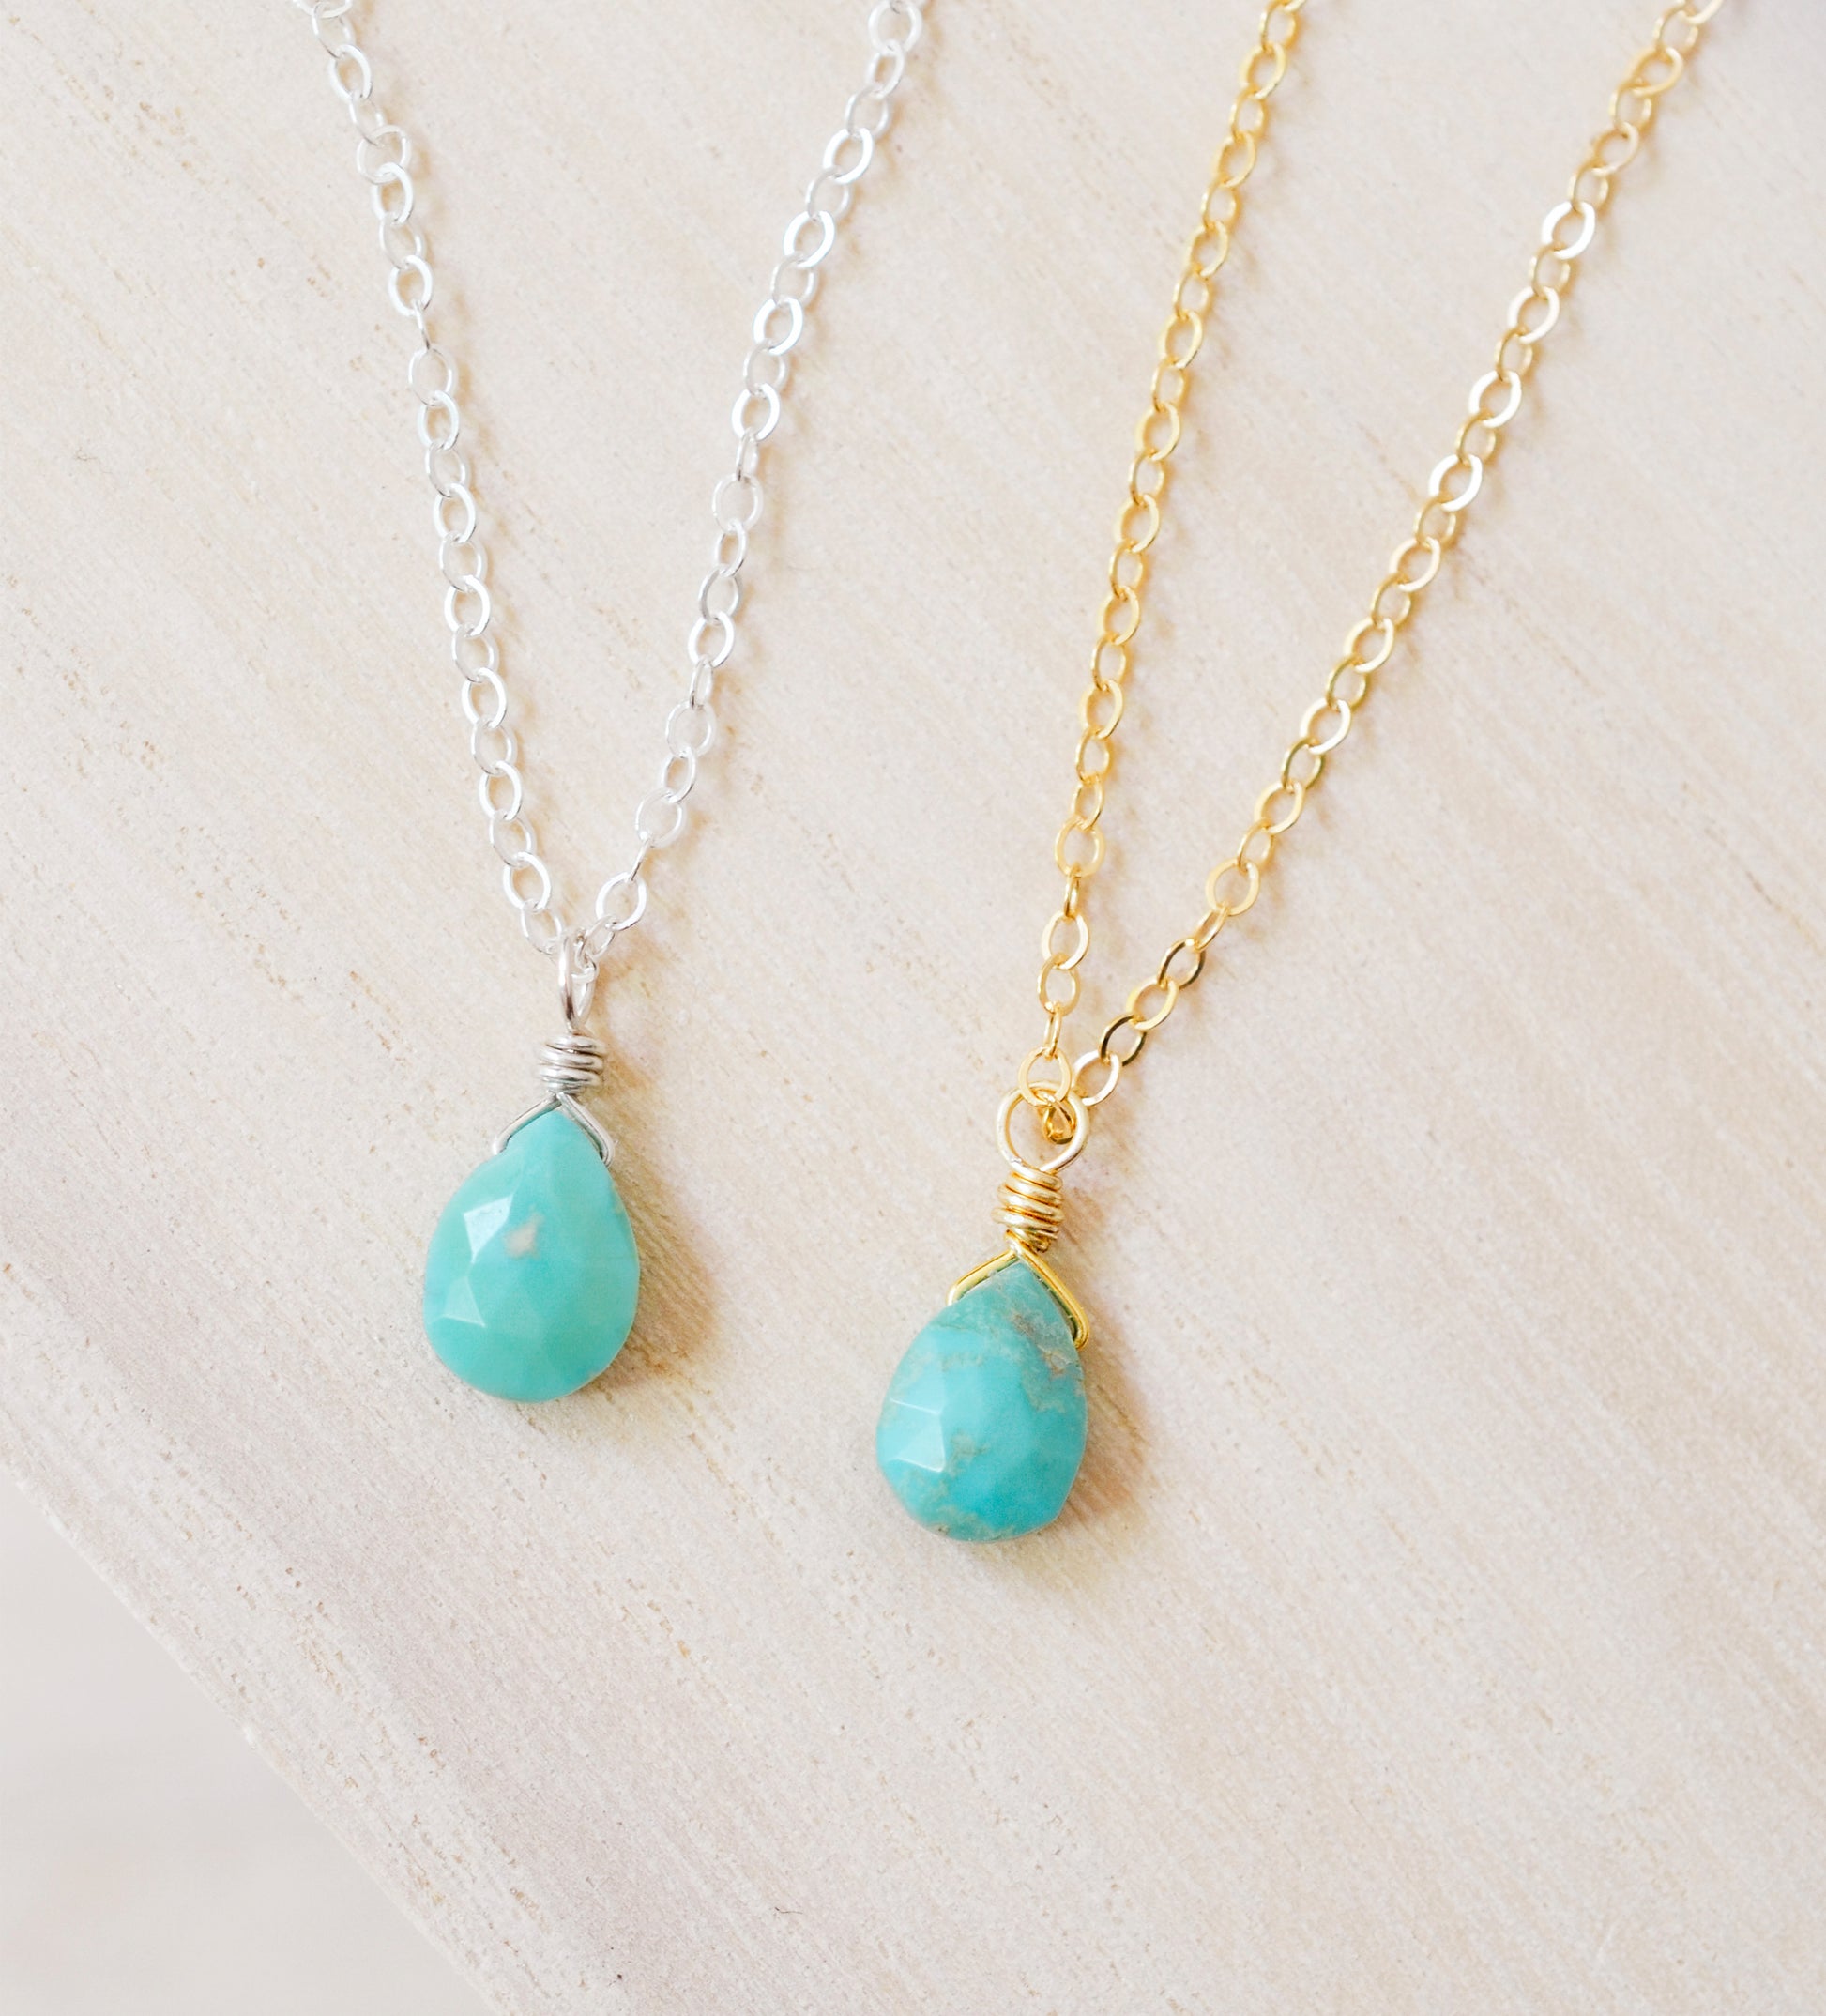 Sterling silver and 14k gold filled options shown with the blue turquoise teardrop pendant.